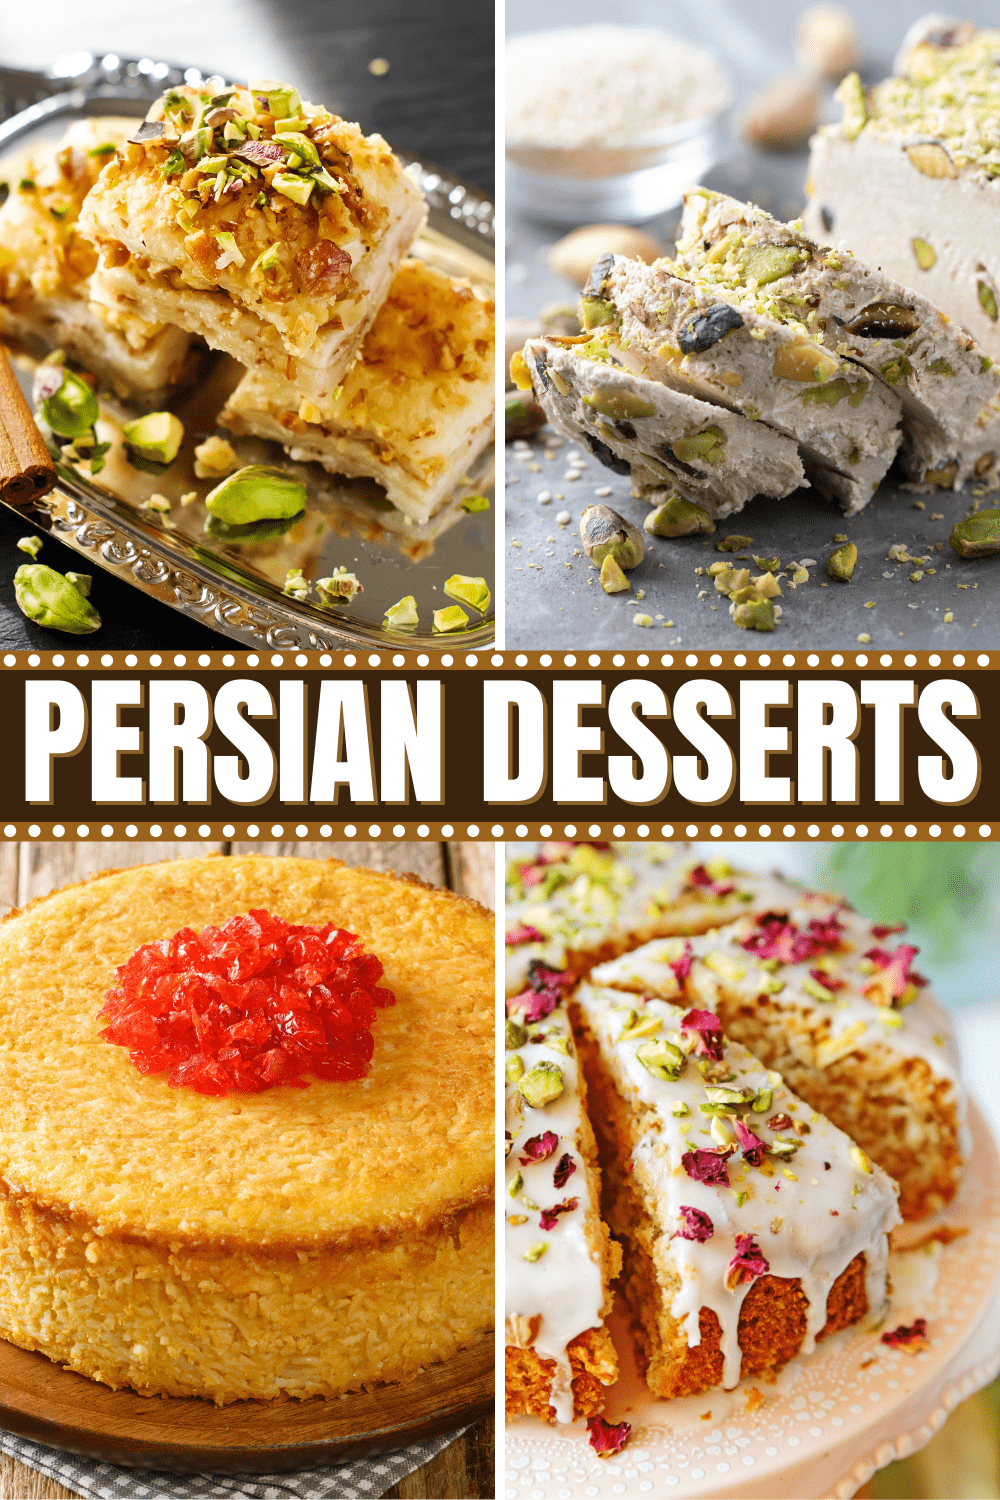 15 Classic Persian Desserts - Insanely Good